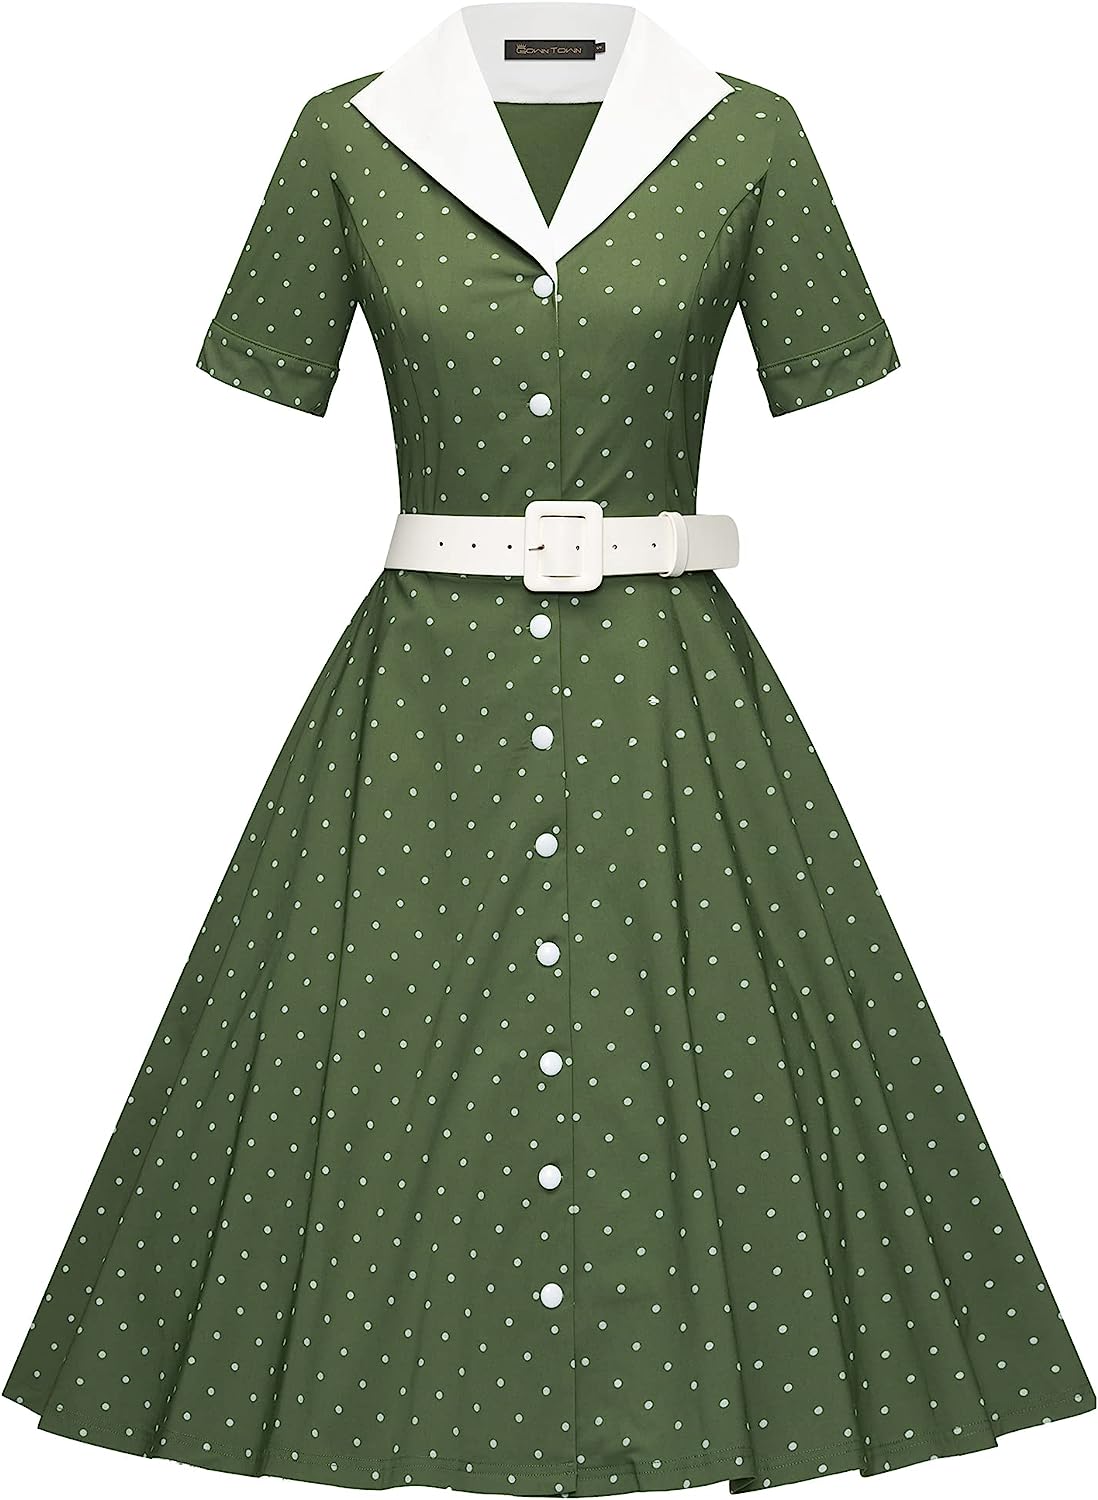 1950s outfits for ladies